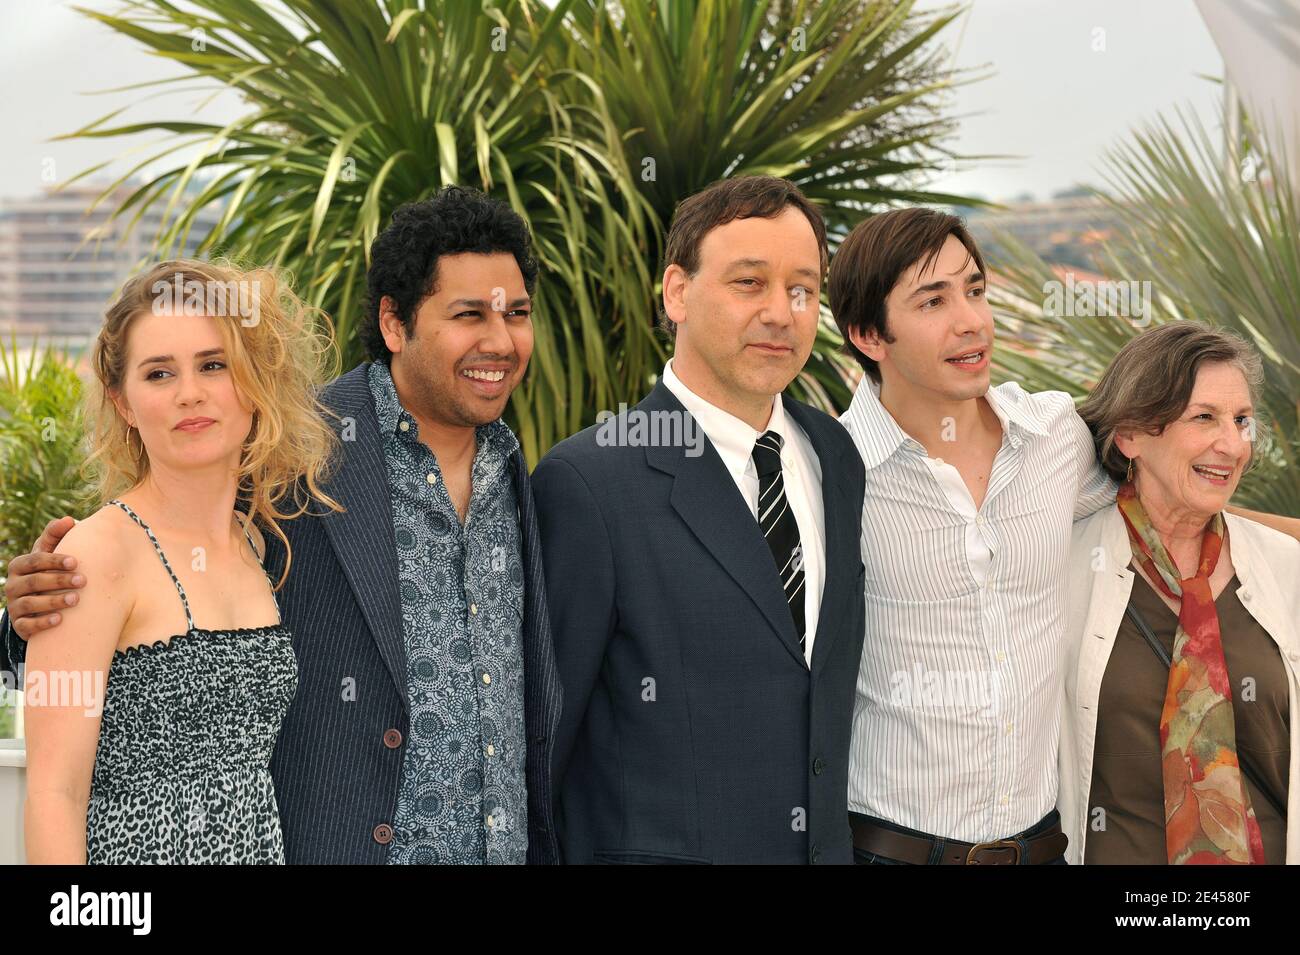 (L-R) Alison Lohman, Dileep Rao, Sam Raimi, Justin Long and Lorna Raver attend the photocall for the film 'Drag Me To Hell at the Palais des Festival during 62nd International Cannes Film Festival in Cannes, France on May 21, 2009. Photo by Nebinger-Orban/ABACAPRESS.COM Stock Photo